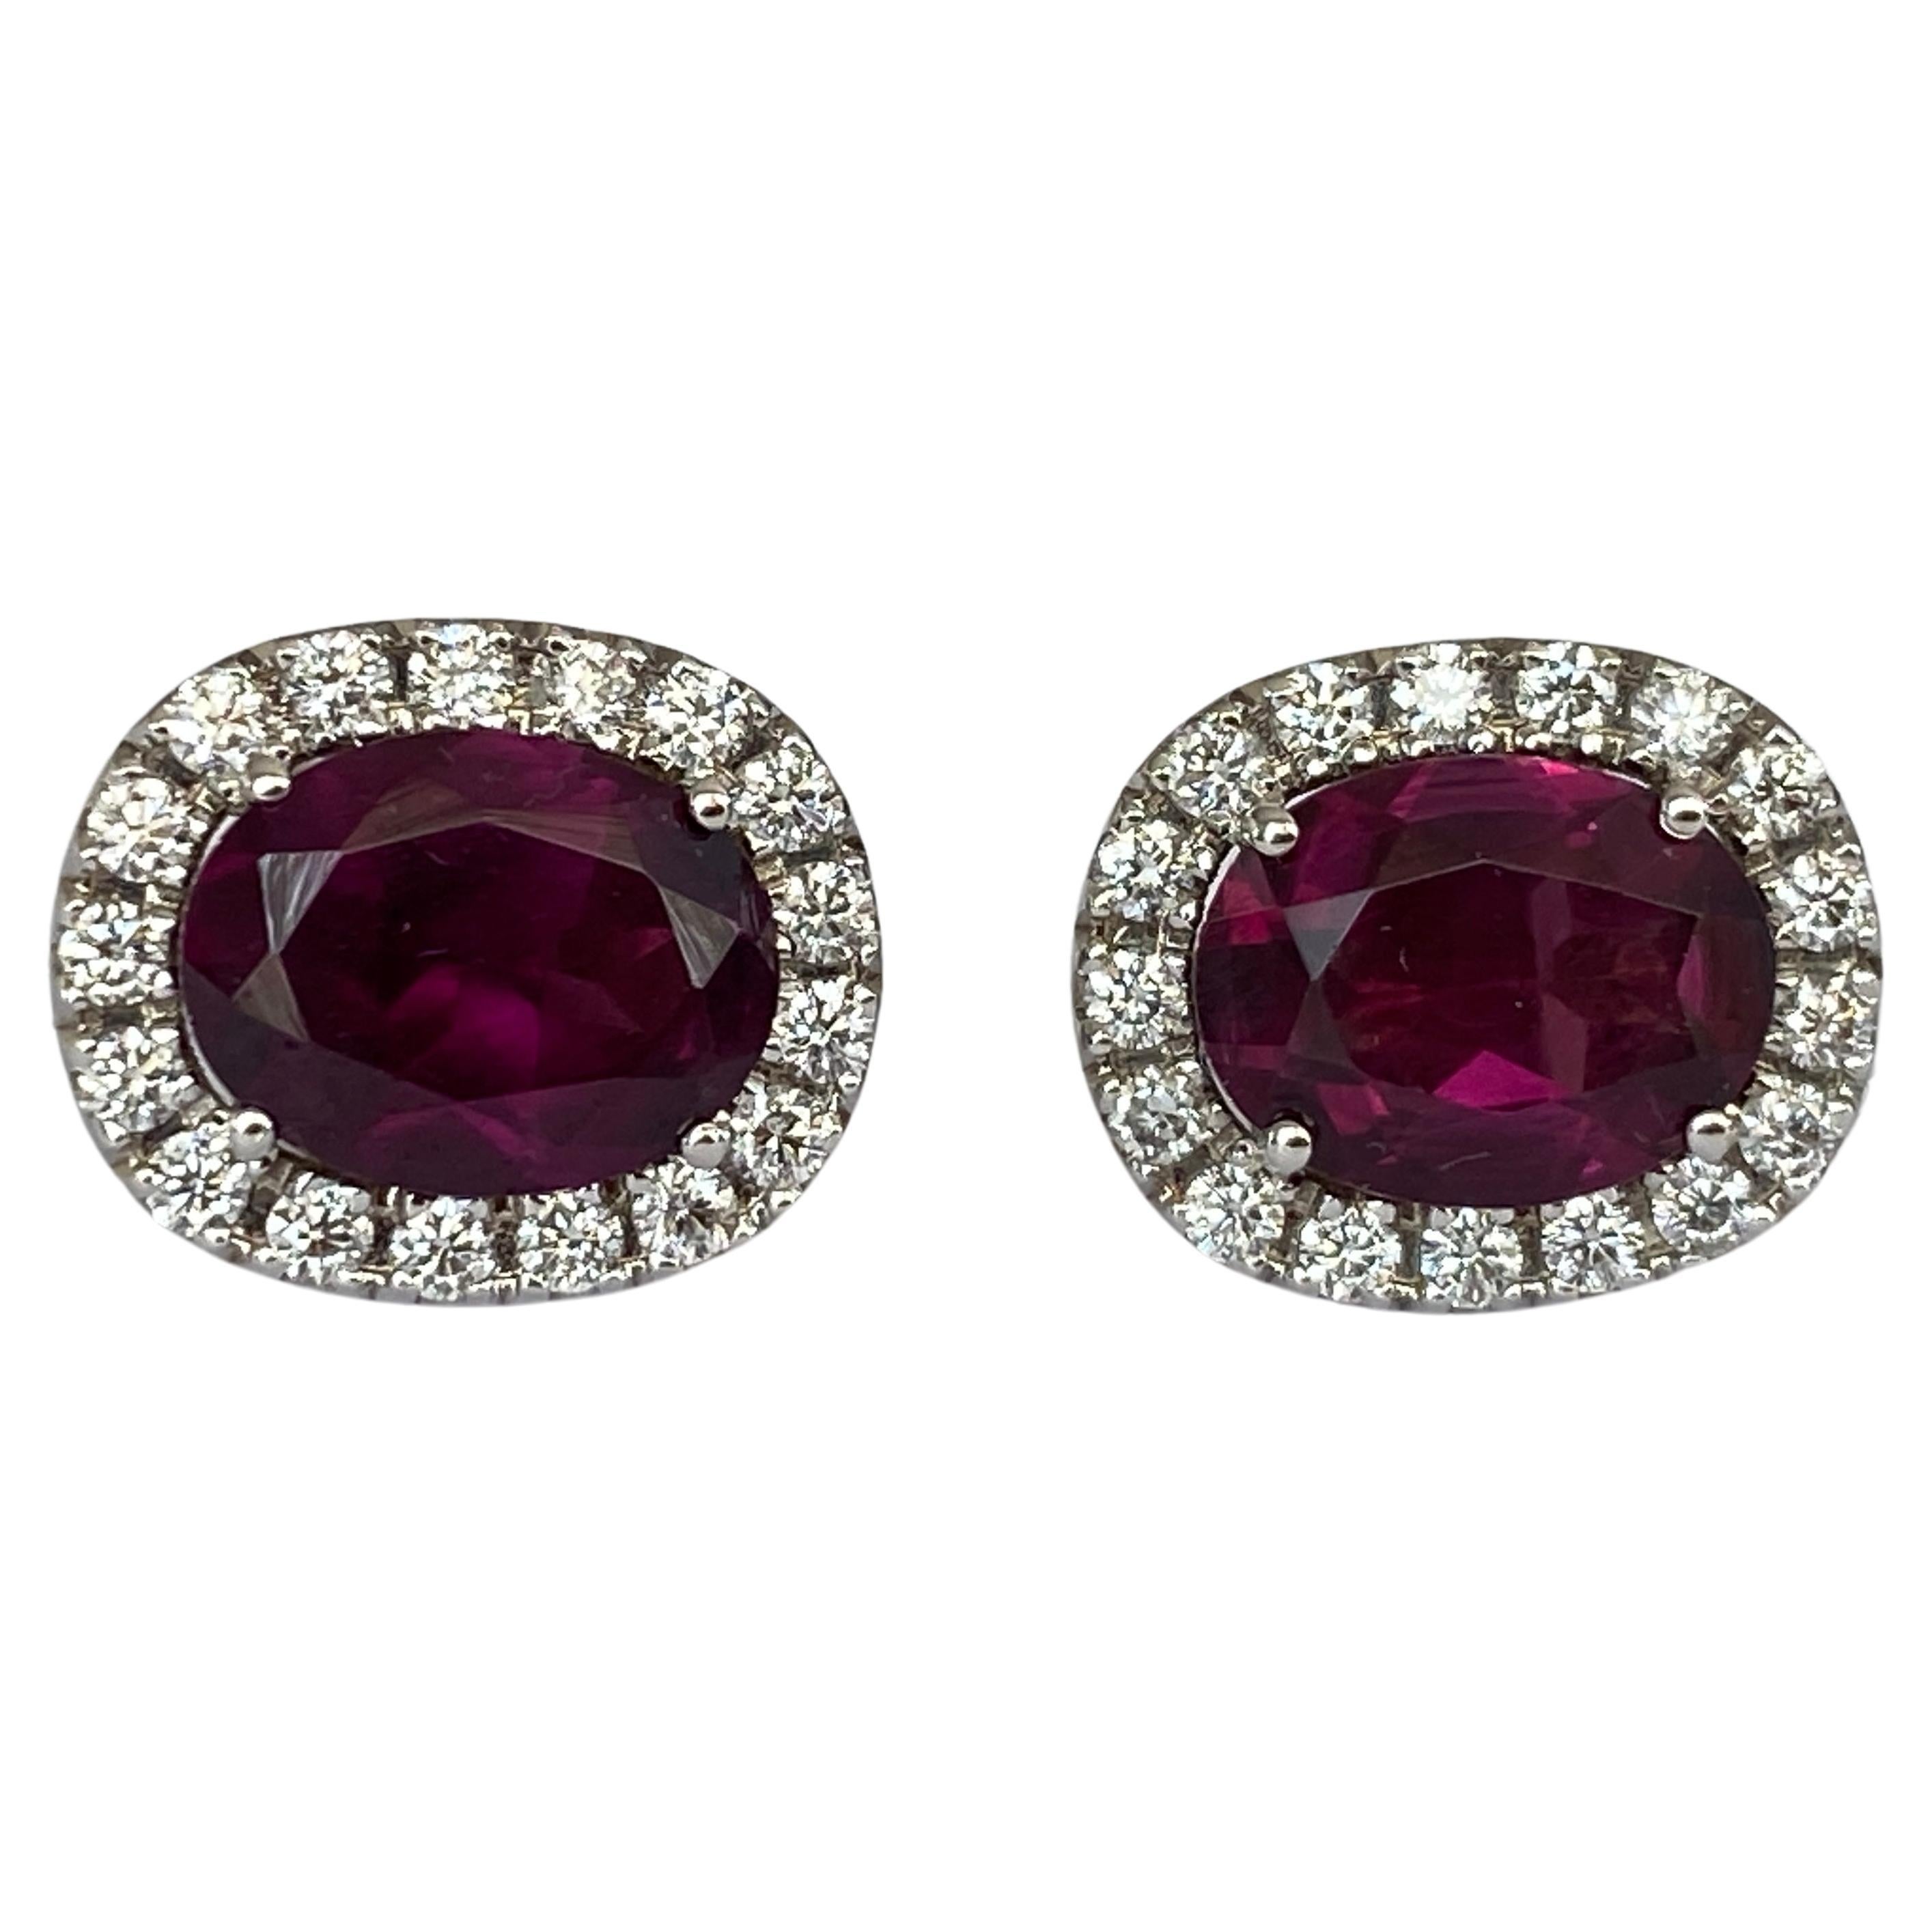 18 kt white gold Diamond earrings studs with  Red Tourmaline